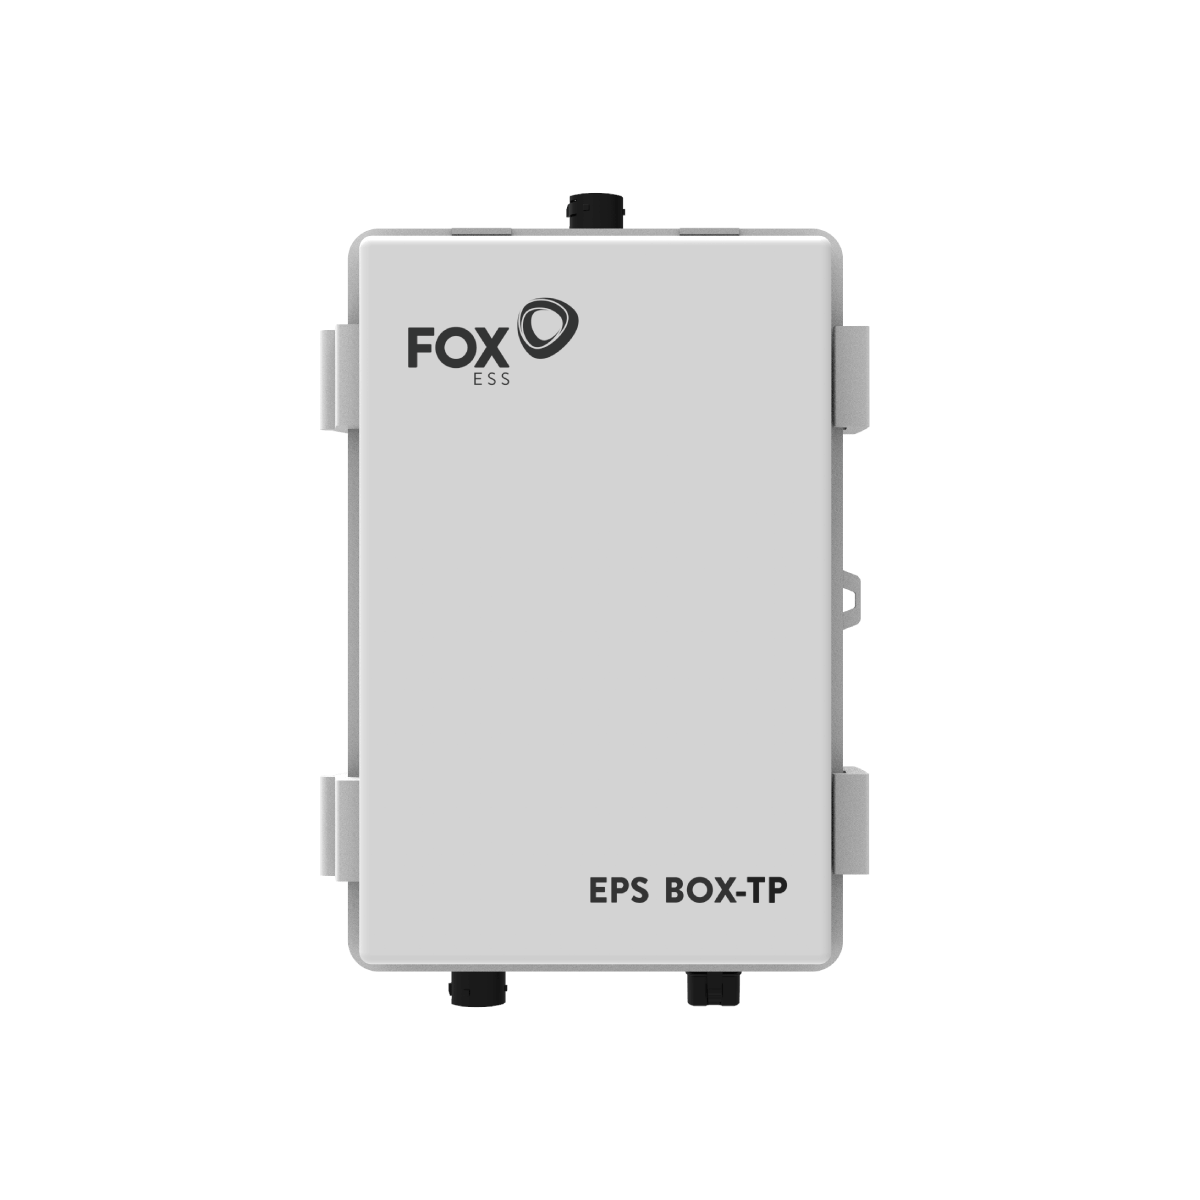 FOX ESS AiO-H1 4,6kW 5,2kWh All-in-One-Speichersystem 1-phasig inkl. Notstromfunktion